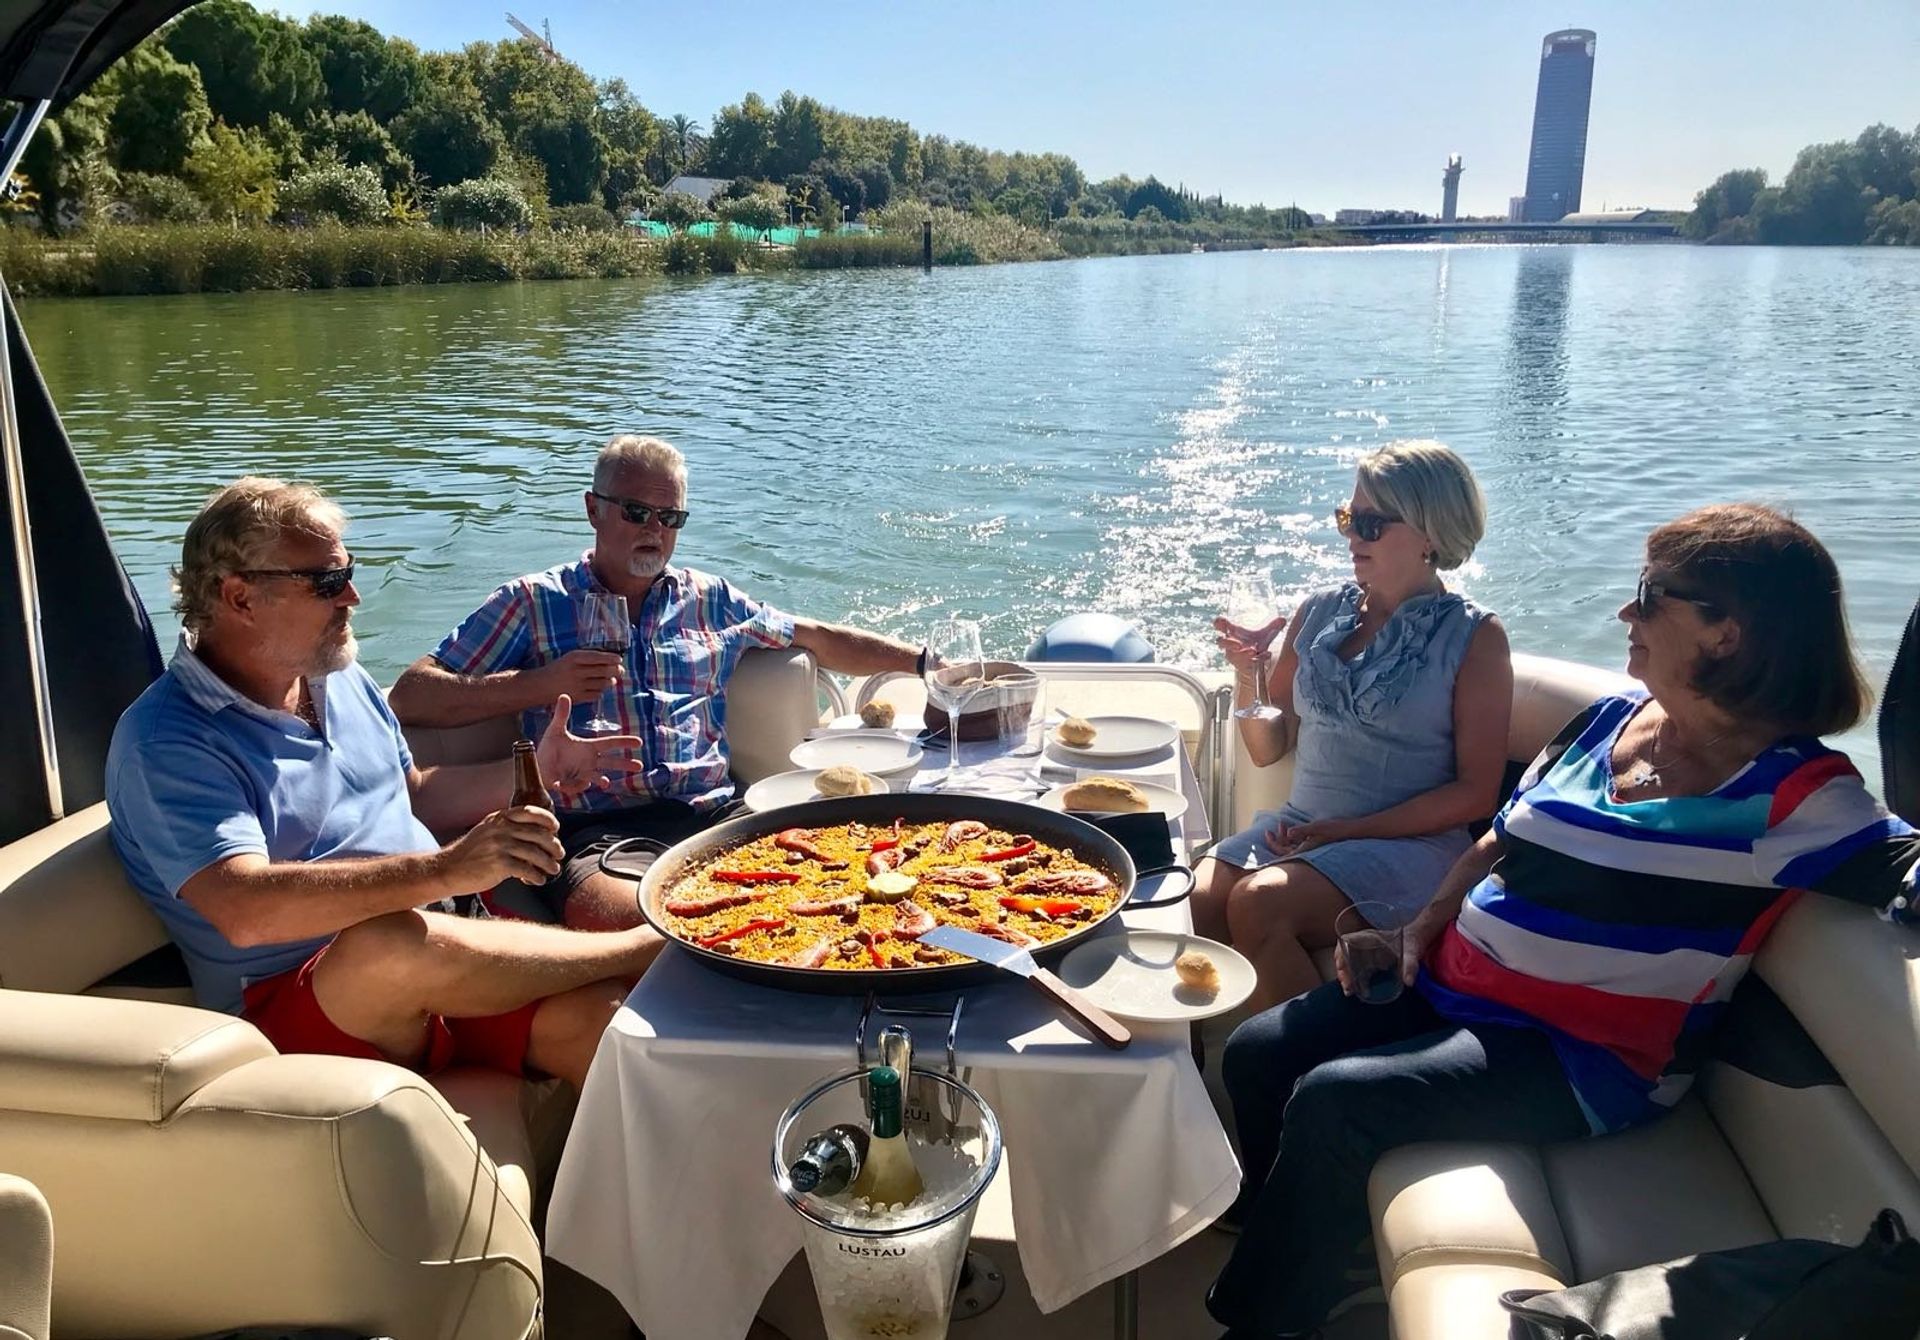 Cruising Guadalquivir River with Esturion Tours is just one of the many ways to explore beautiful Seville